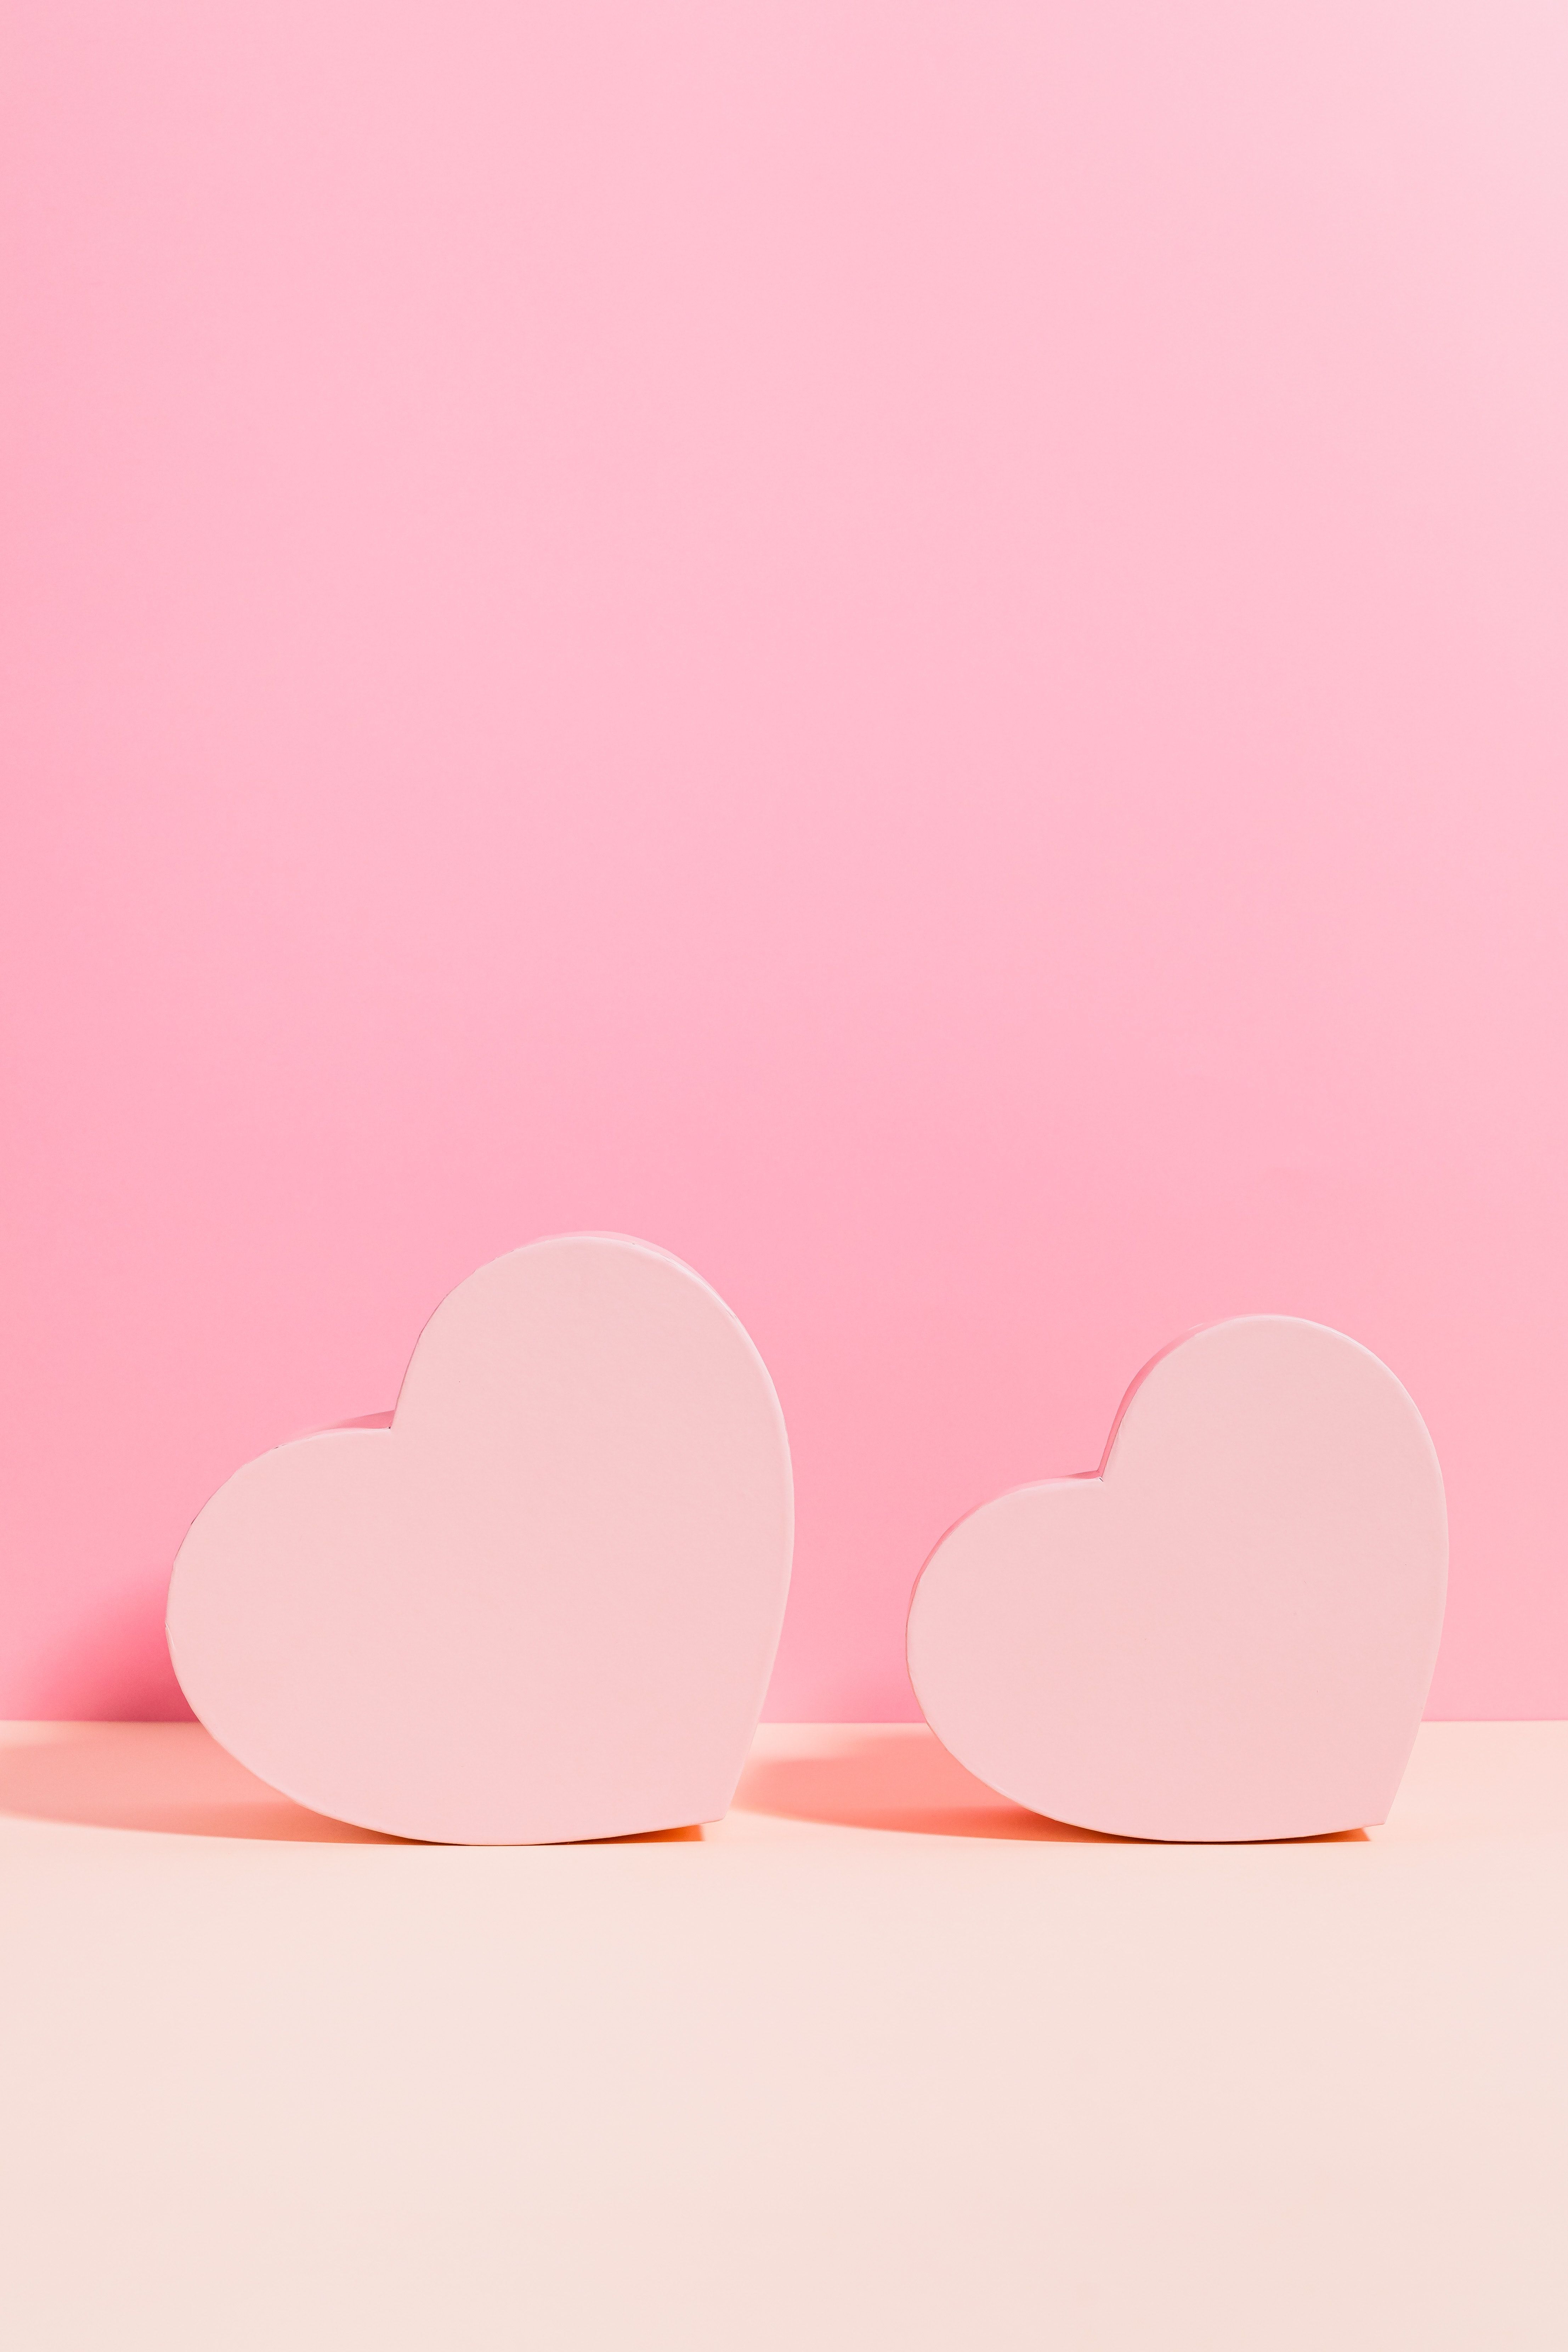 Two Pink Heart Illustration on Pink Background · Free